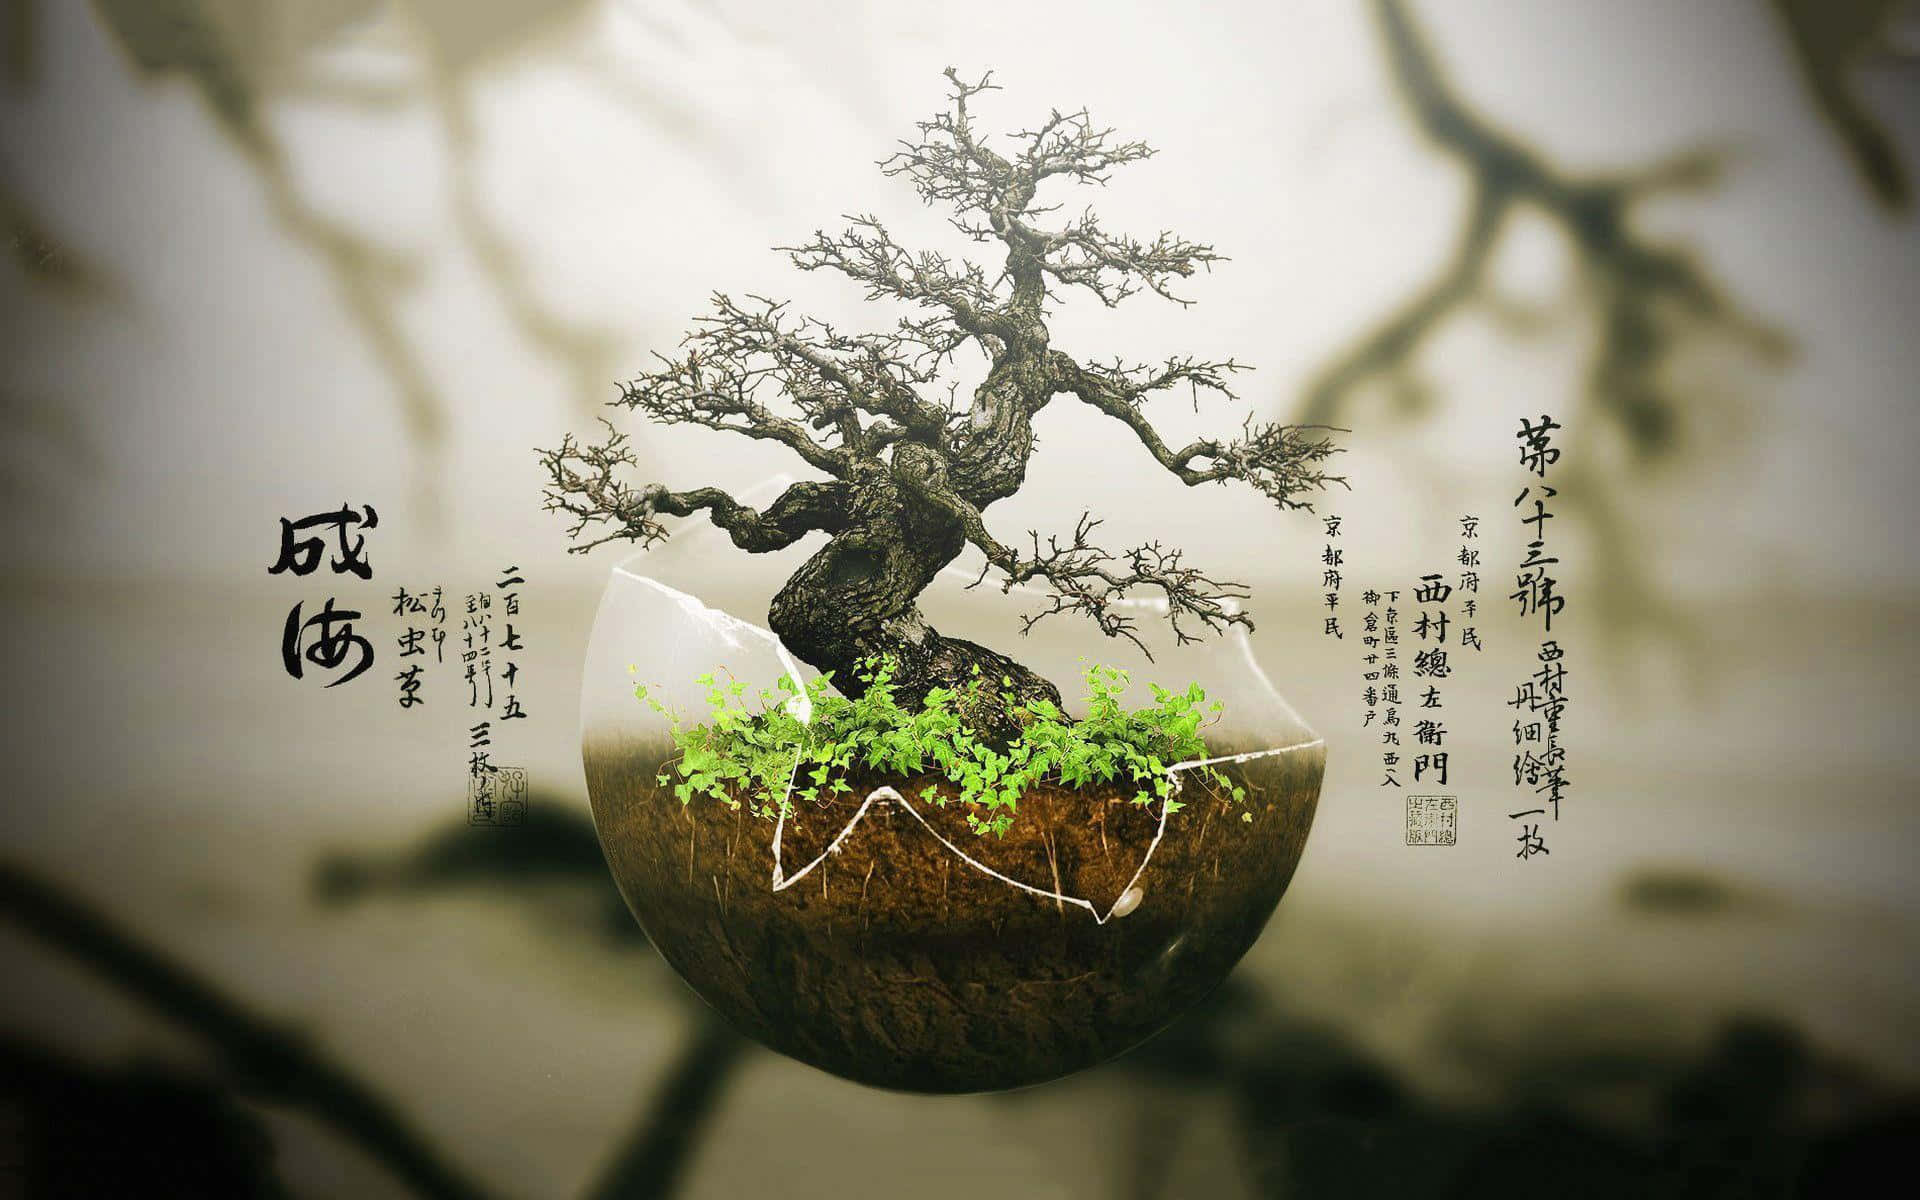 A Bonsai Tree In A Bowl With Chinese Writing